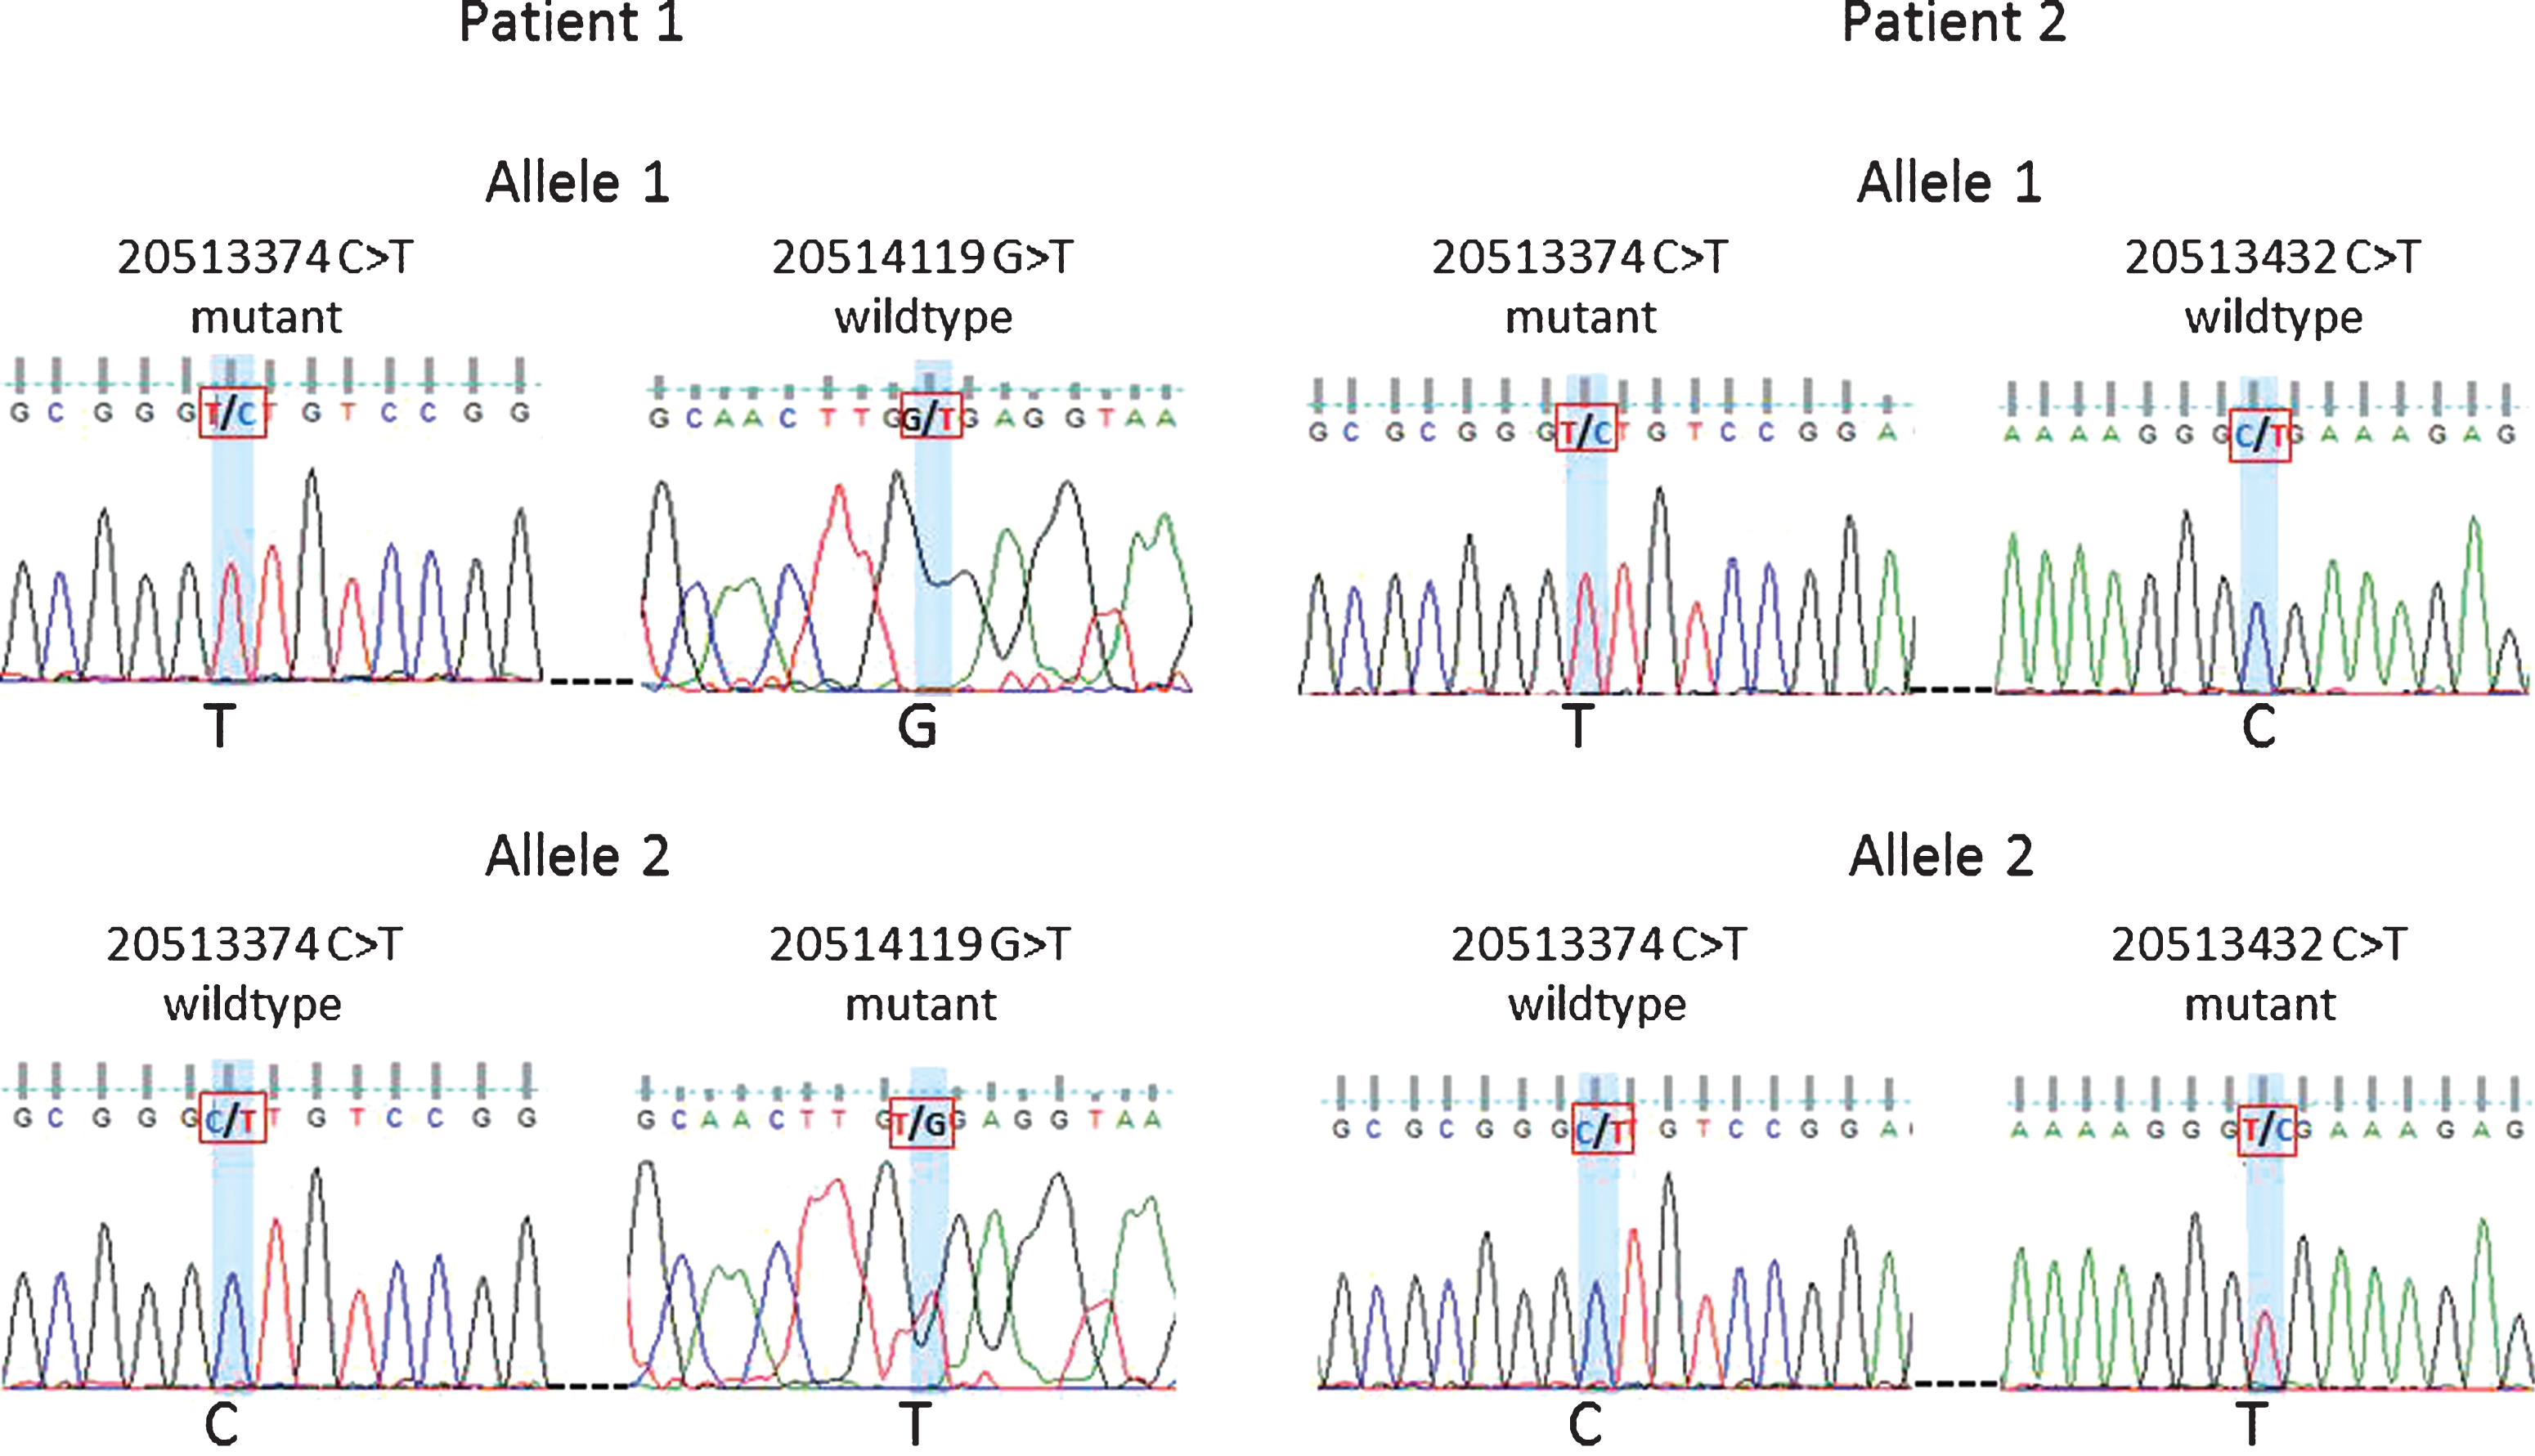 Phasing of variants 20513374 and 20514119 in Patient 1 and variants 20513374 and 20513432 in Patient 2. Sanger sequencing traces shown for patient 1: allele 1 mutant 20513374 and wildtype 20514119 vs. allele 2 wildtype 20513374 and mutant 20514119. Patient 2: allele 1 mutant 20513374 and wildtype 20513432 vs. allele 2 wildtype 20513374 and mutant 20513432.